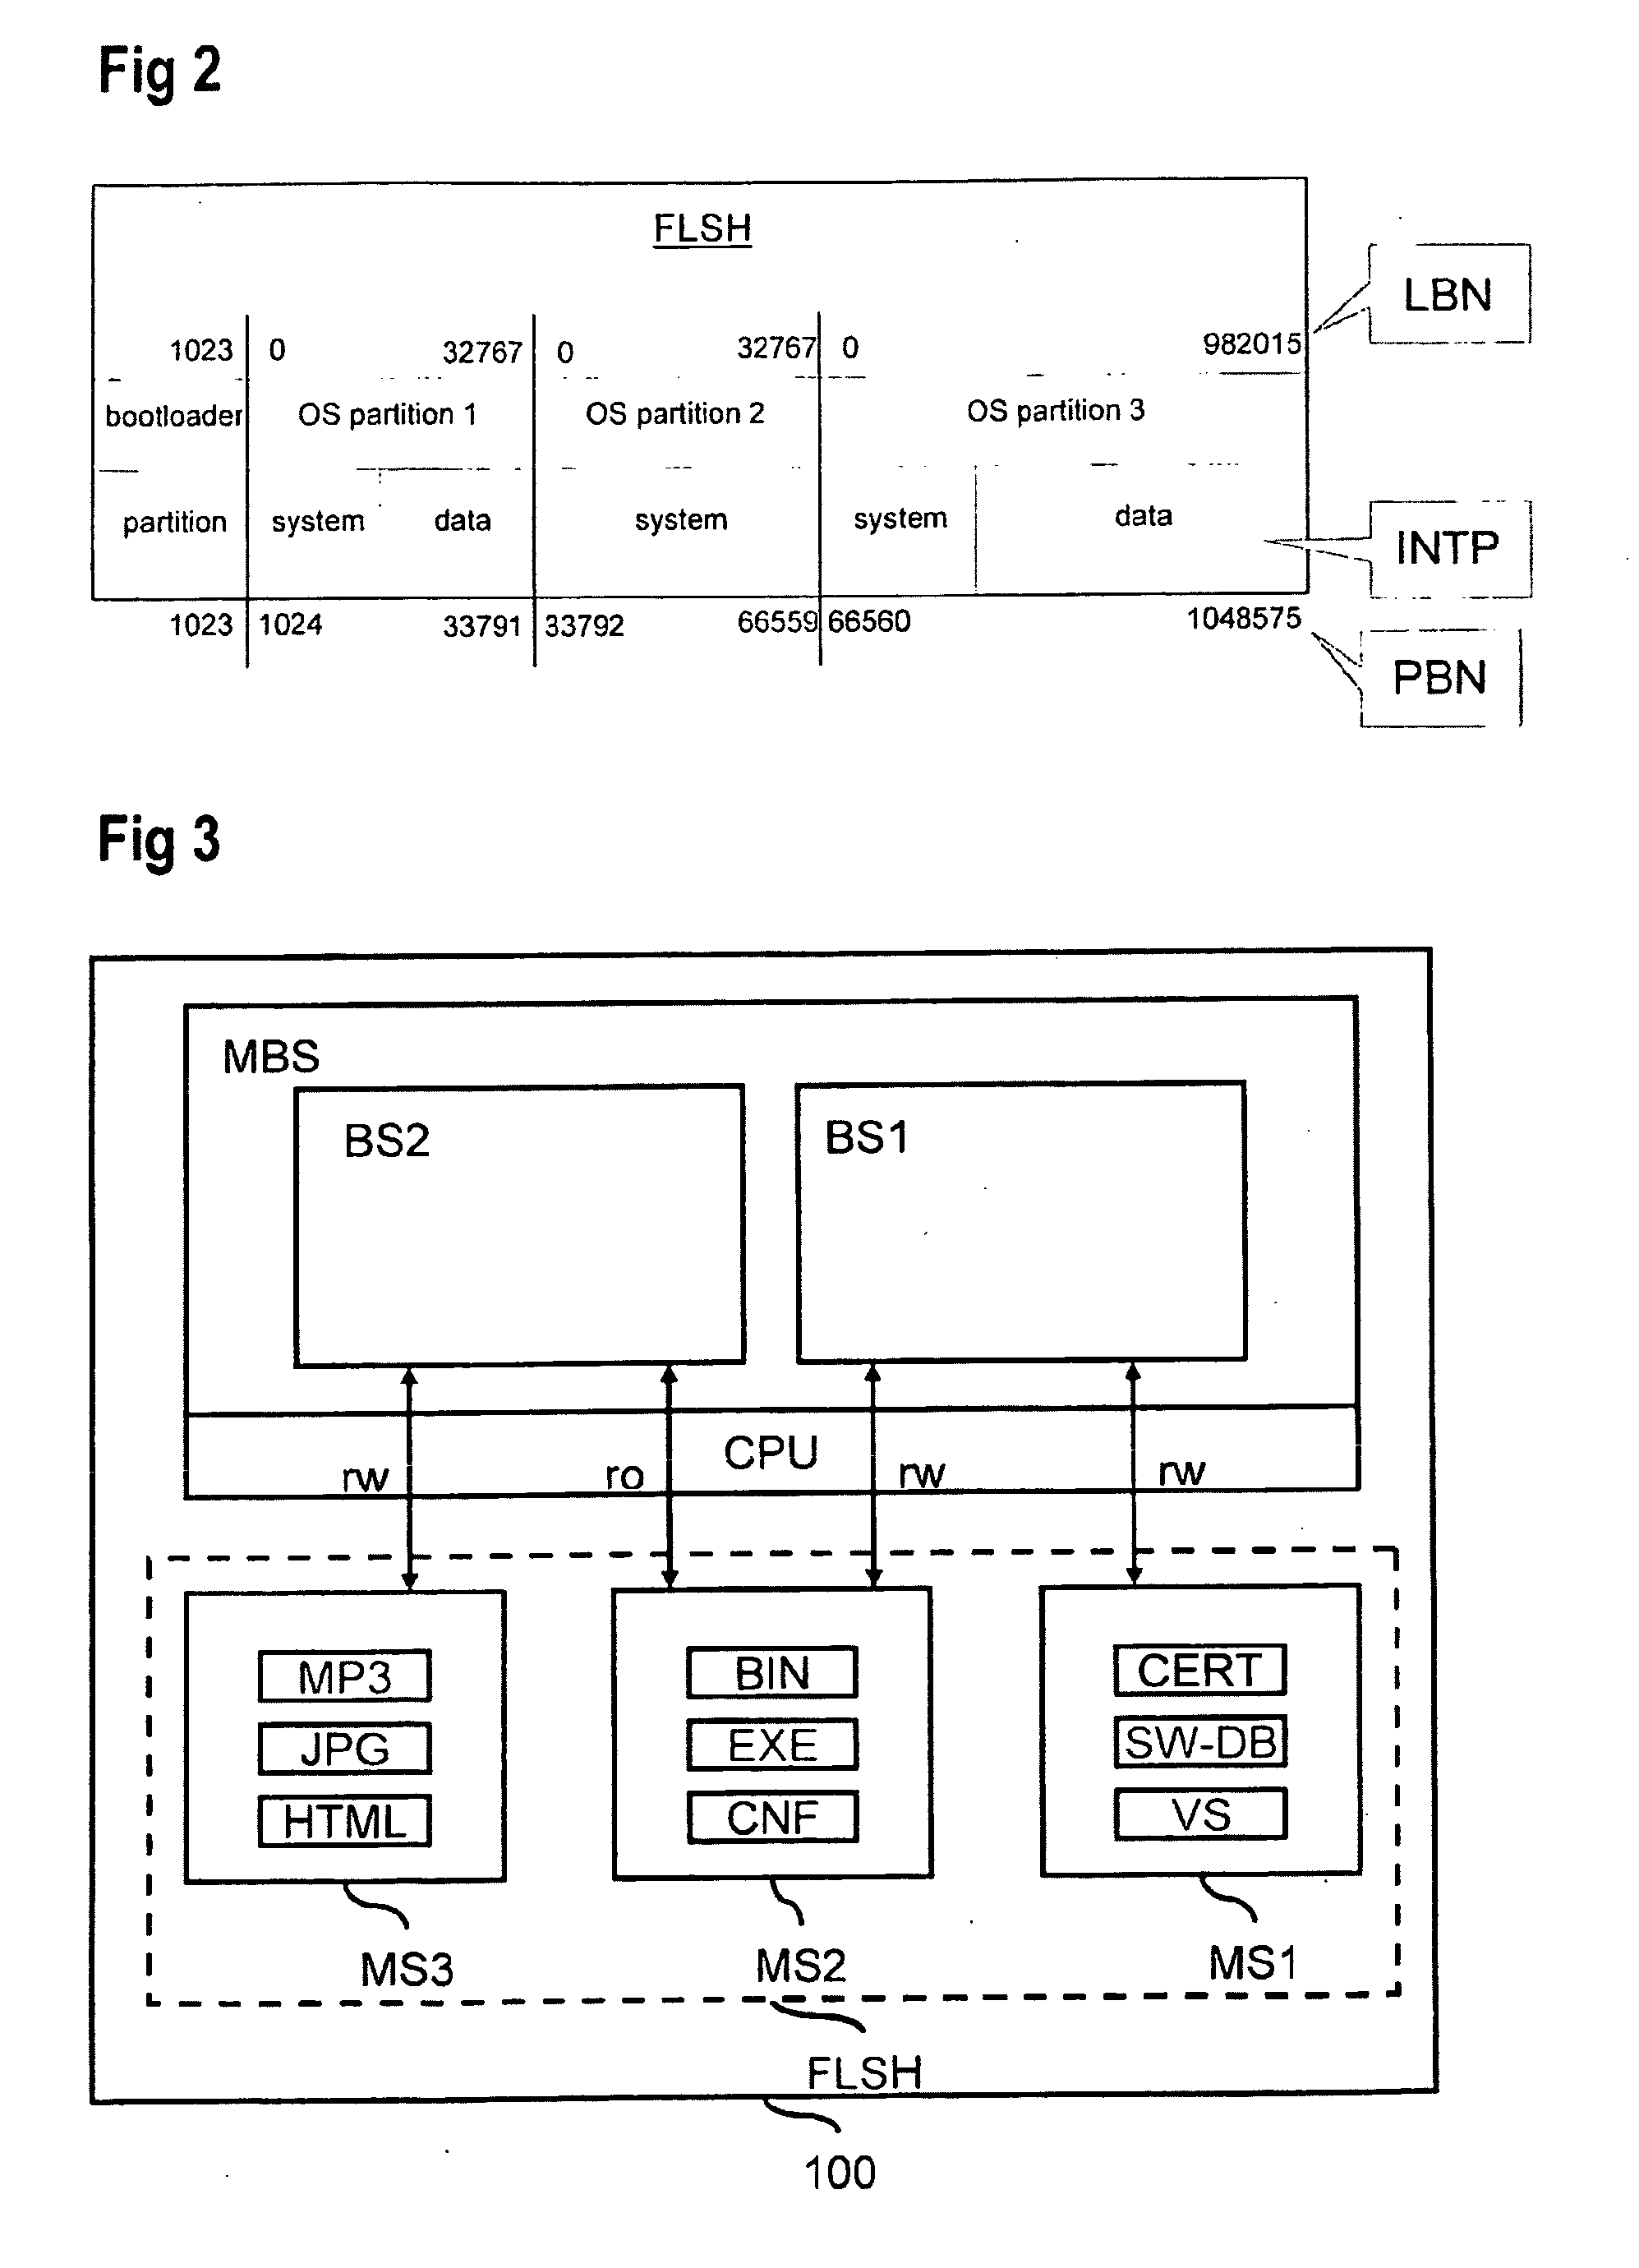 Memory controller for providing a plurality of defined areas of a mass storage medium as independent mass memories to a master operating system core for exclusive provision to virtual machines